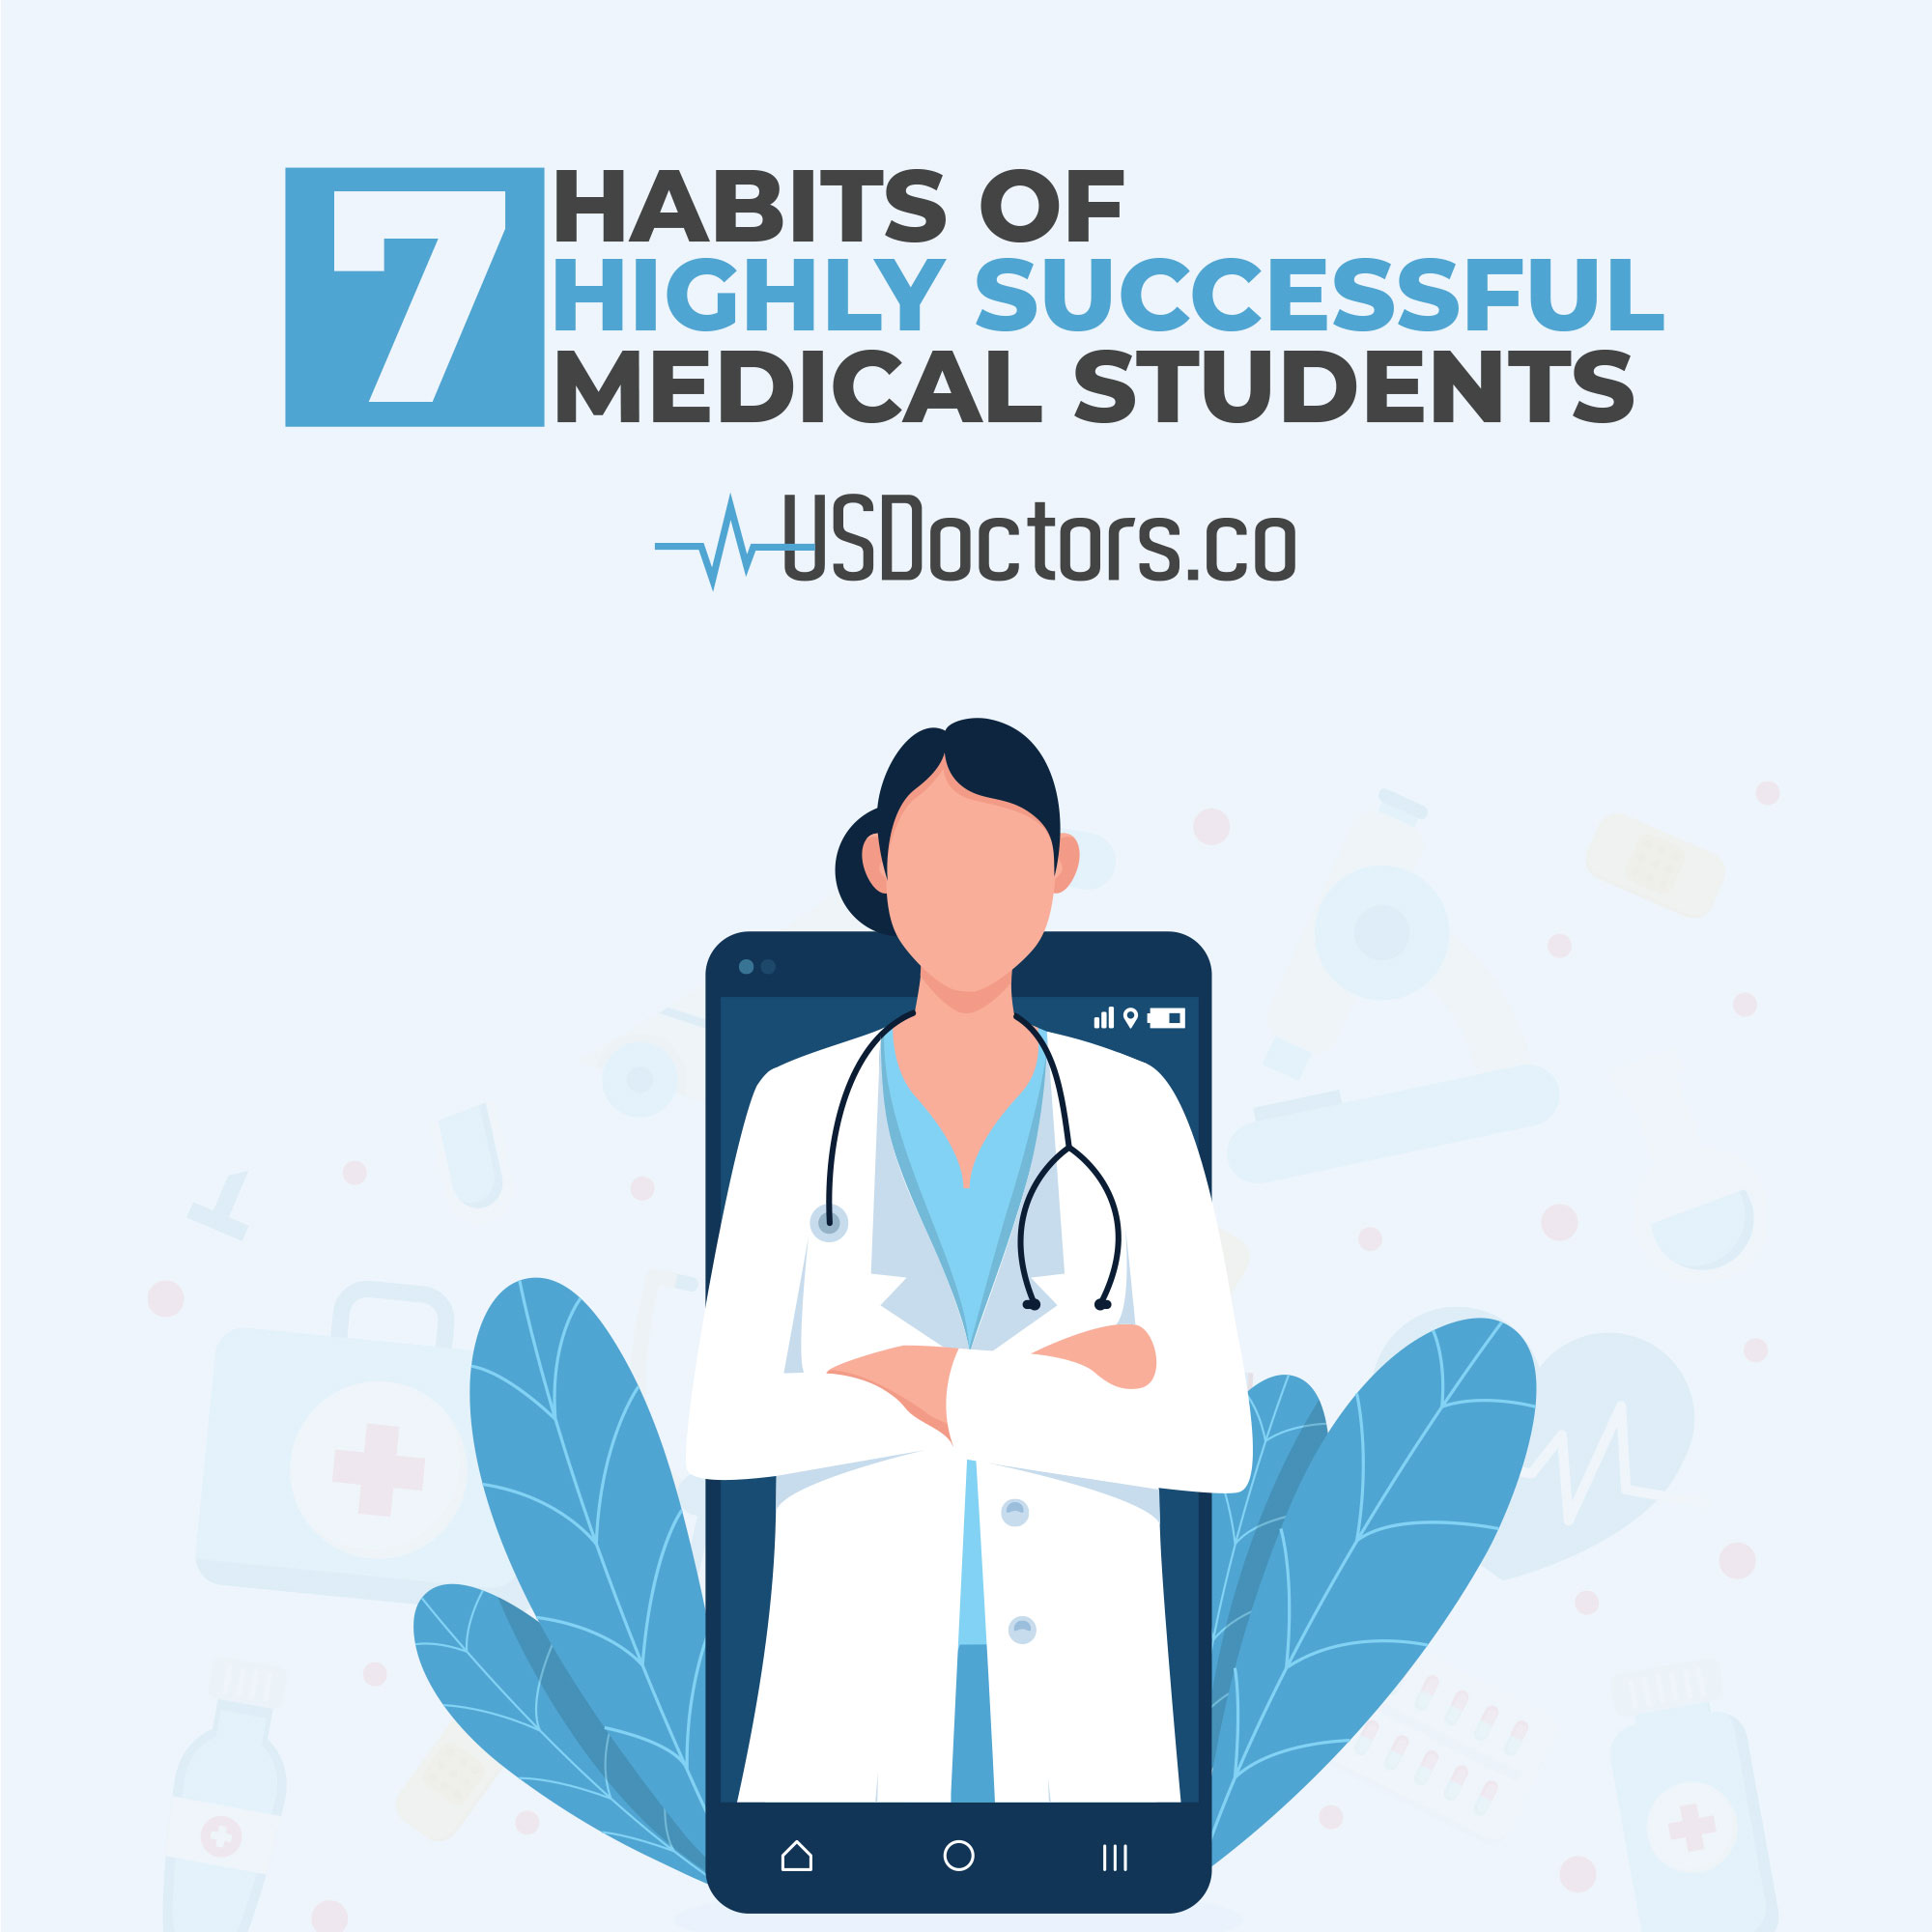 7 Habits of Highly Successful Medical Students